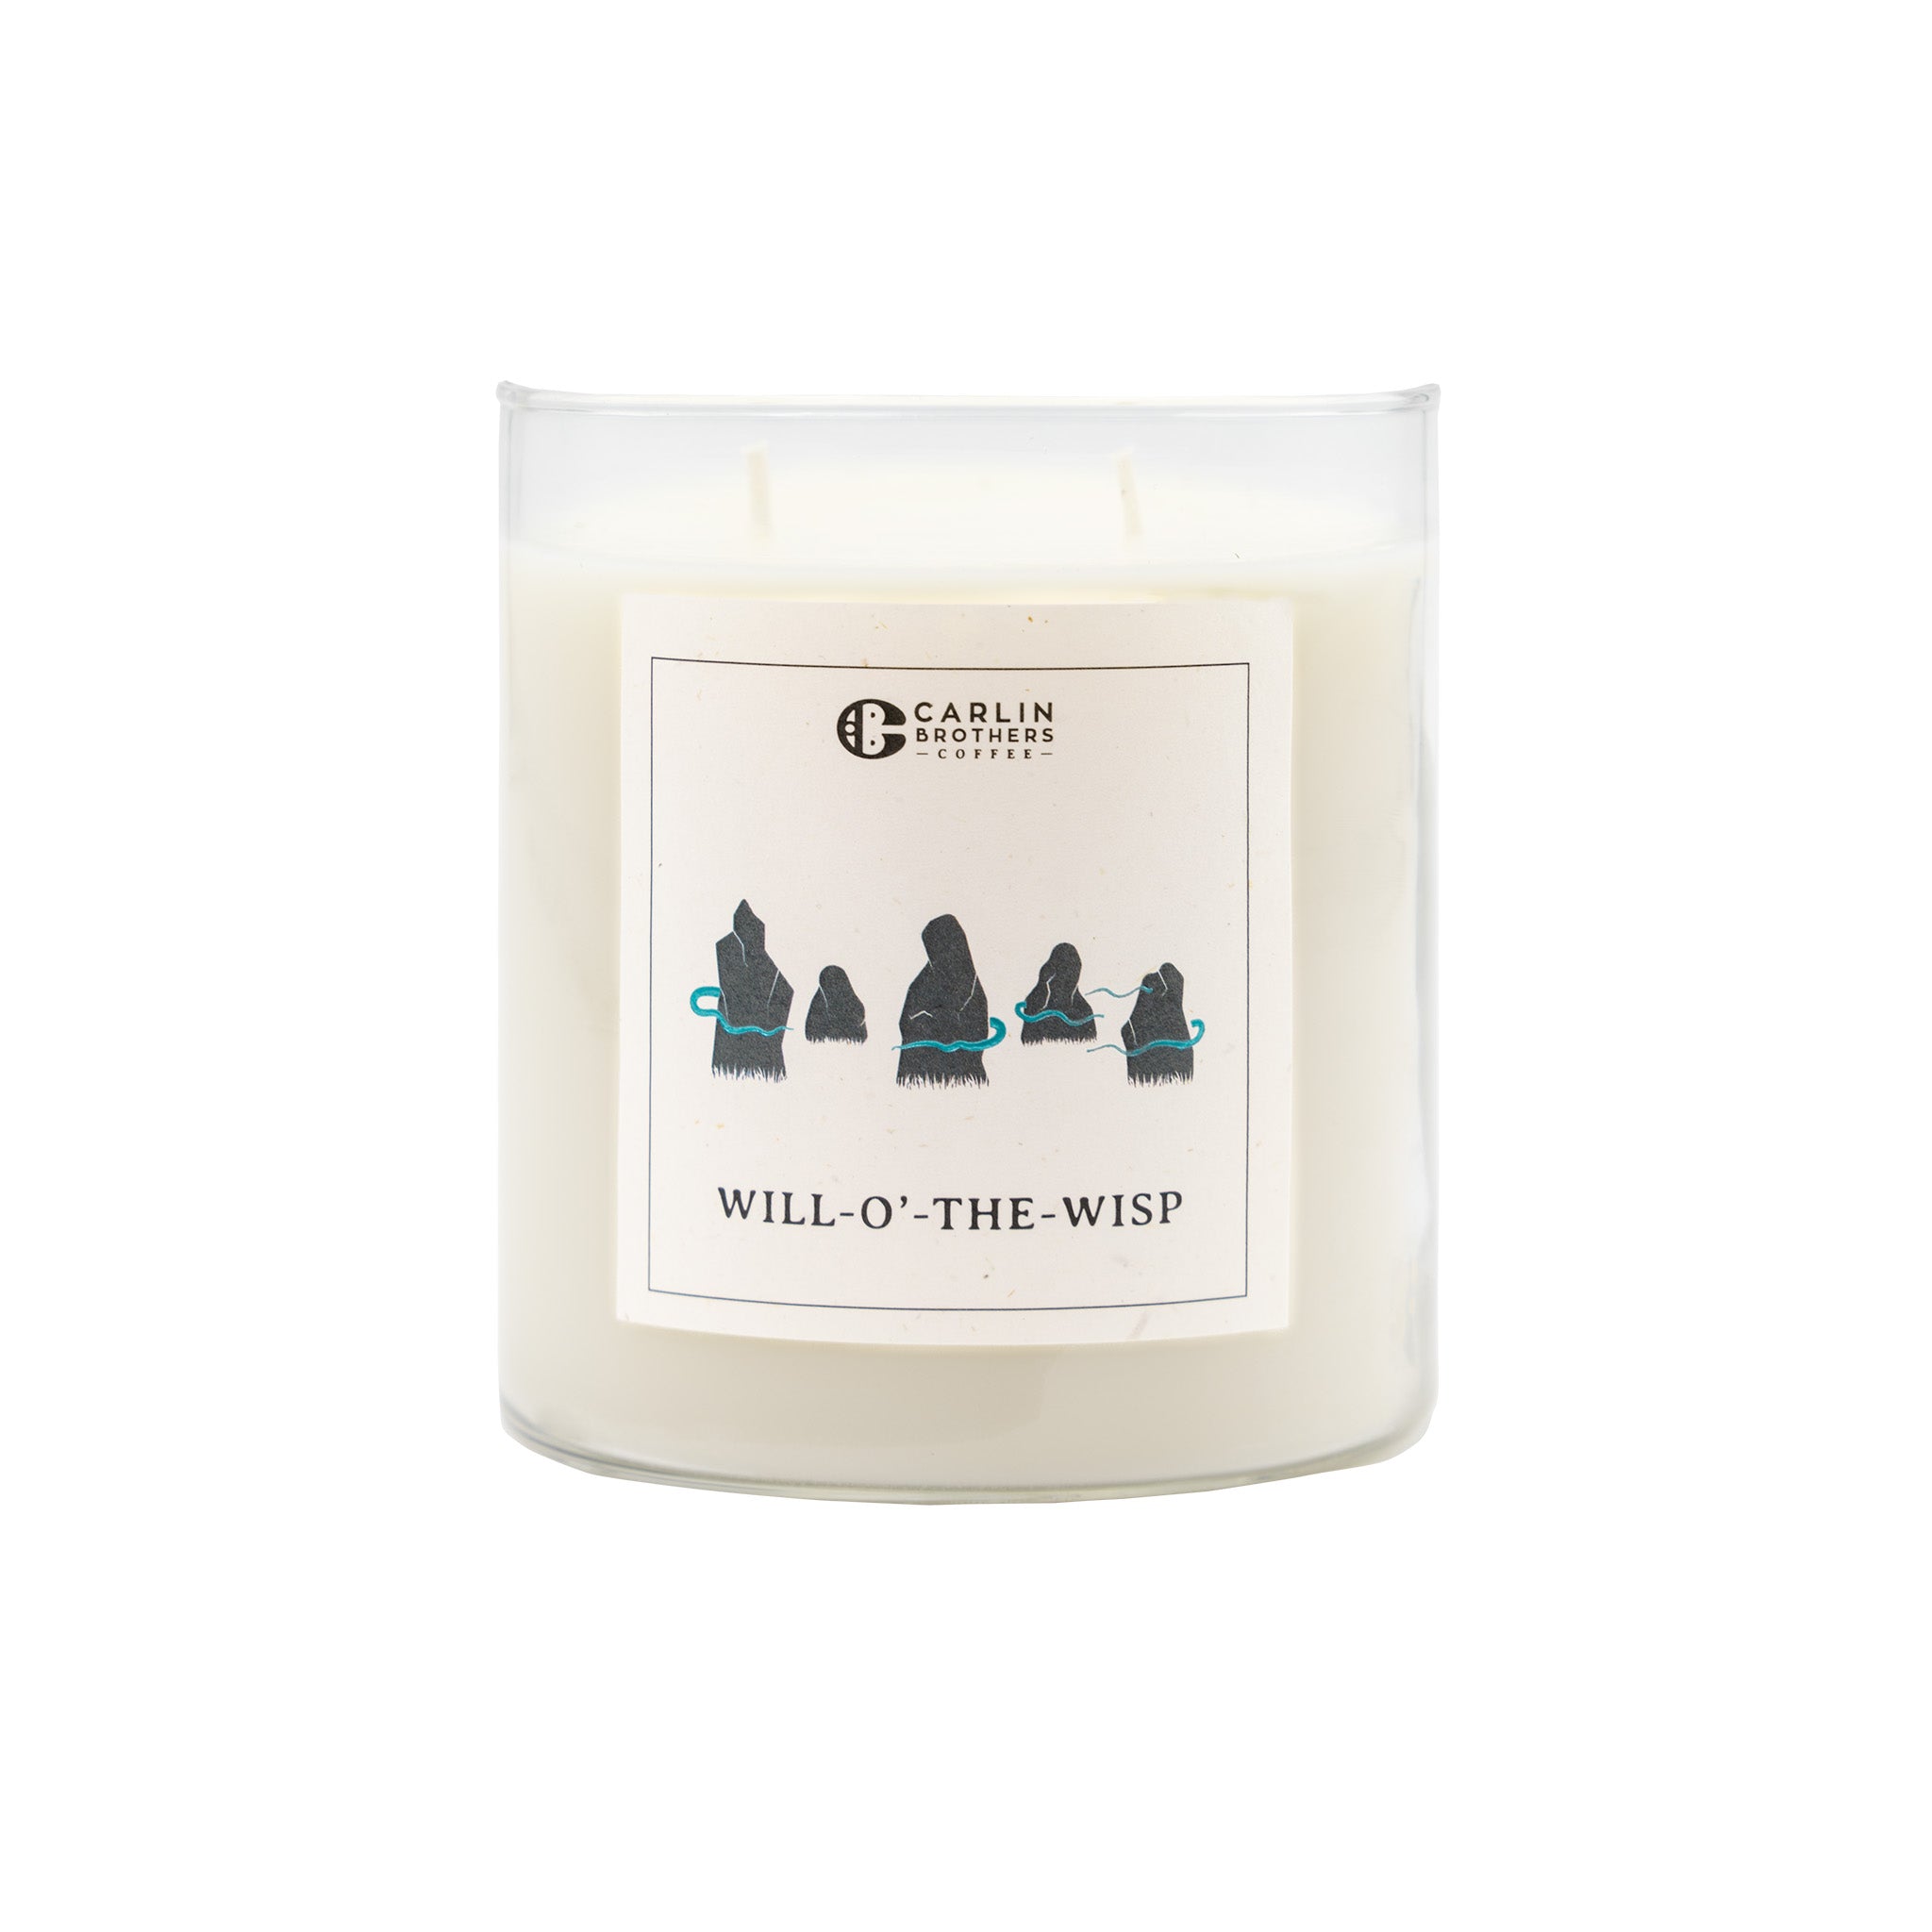 Super Carlin Brothers Mercantile Royal Candle Will-o'-the-wisp candle